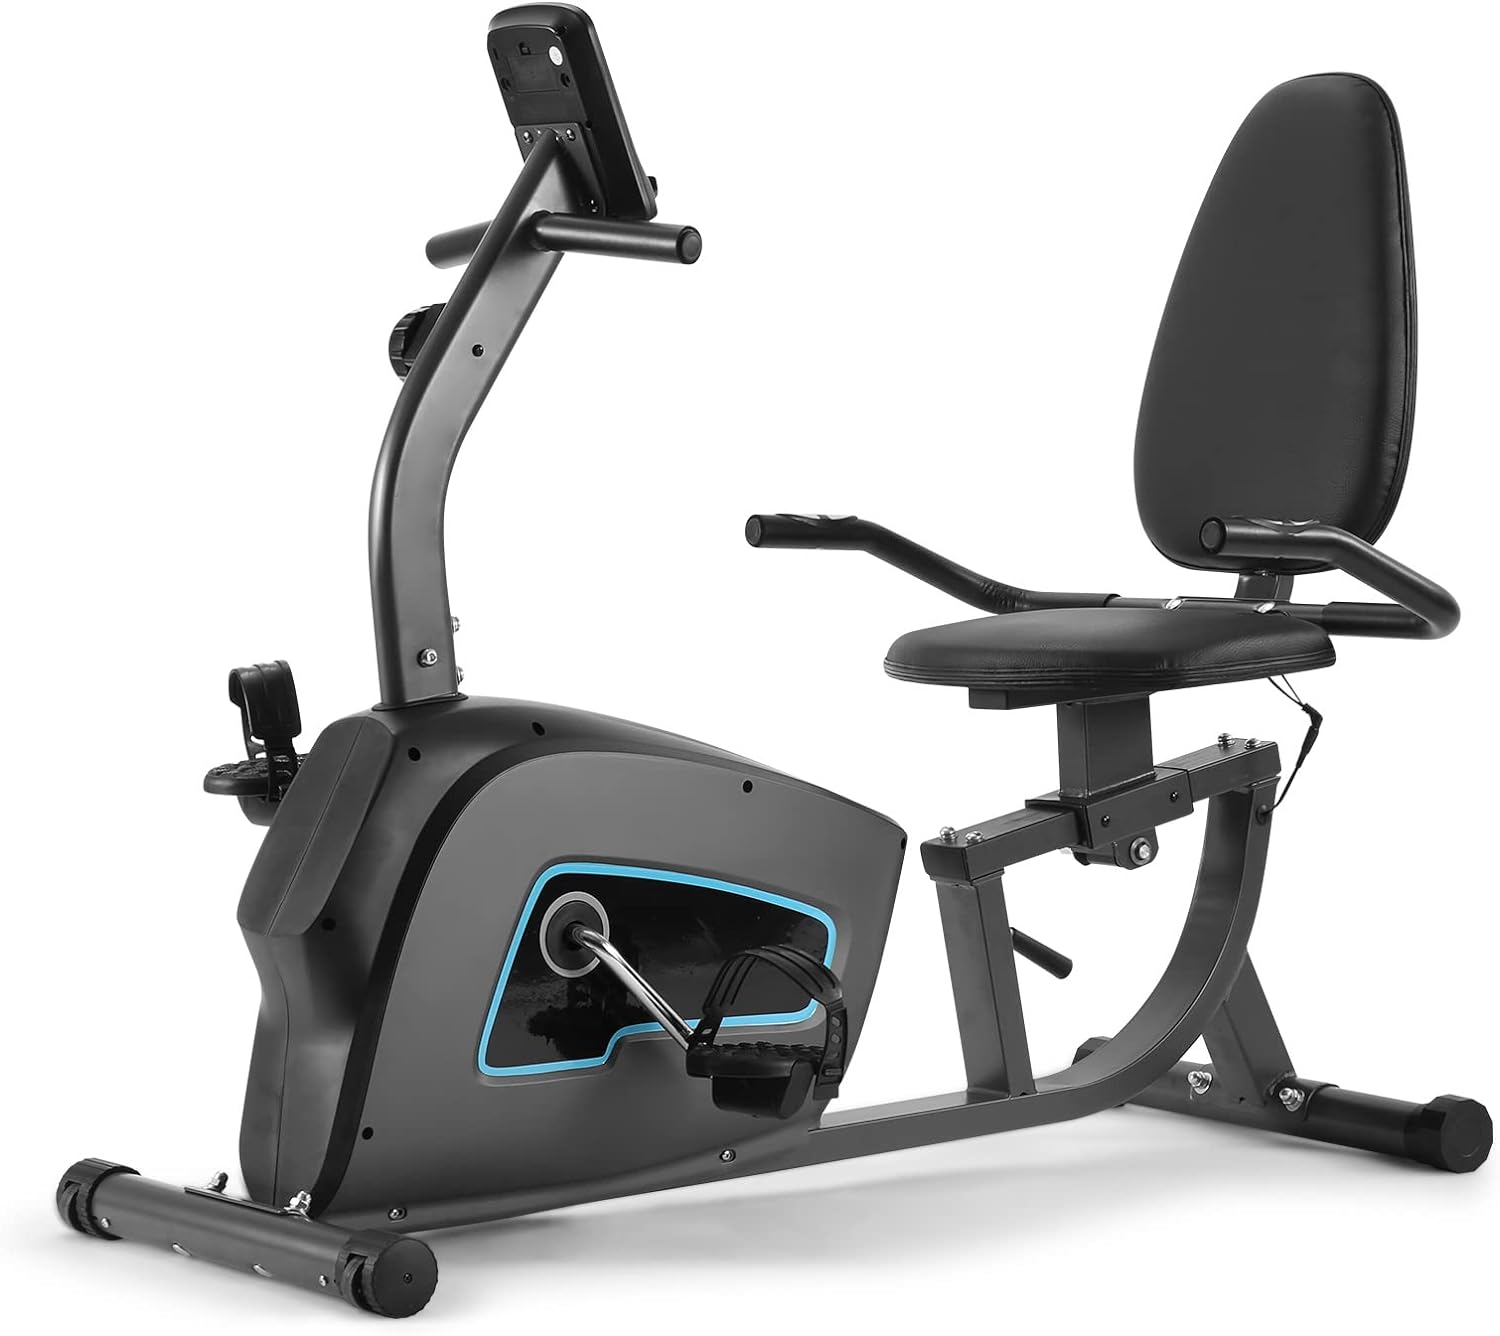 Get Fit with the Recumbent Exercise Bike! Limited Time Offer!